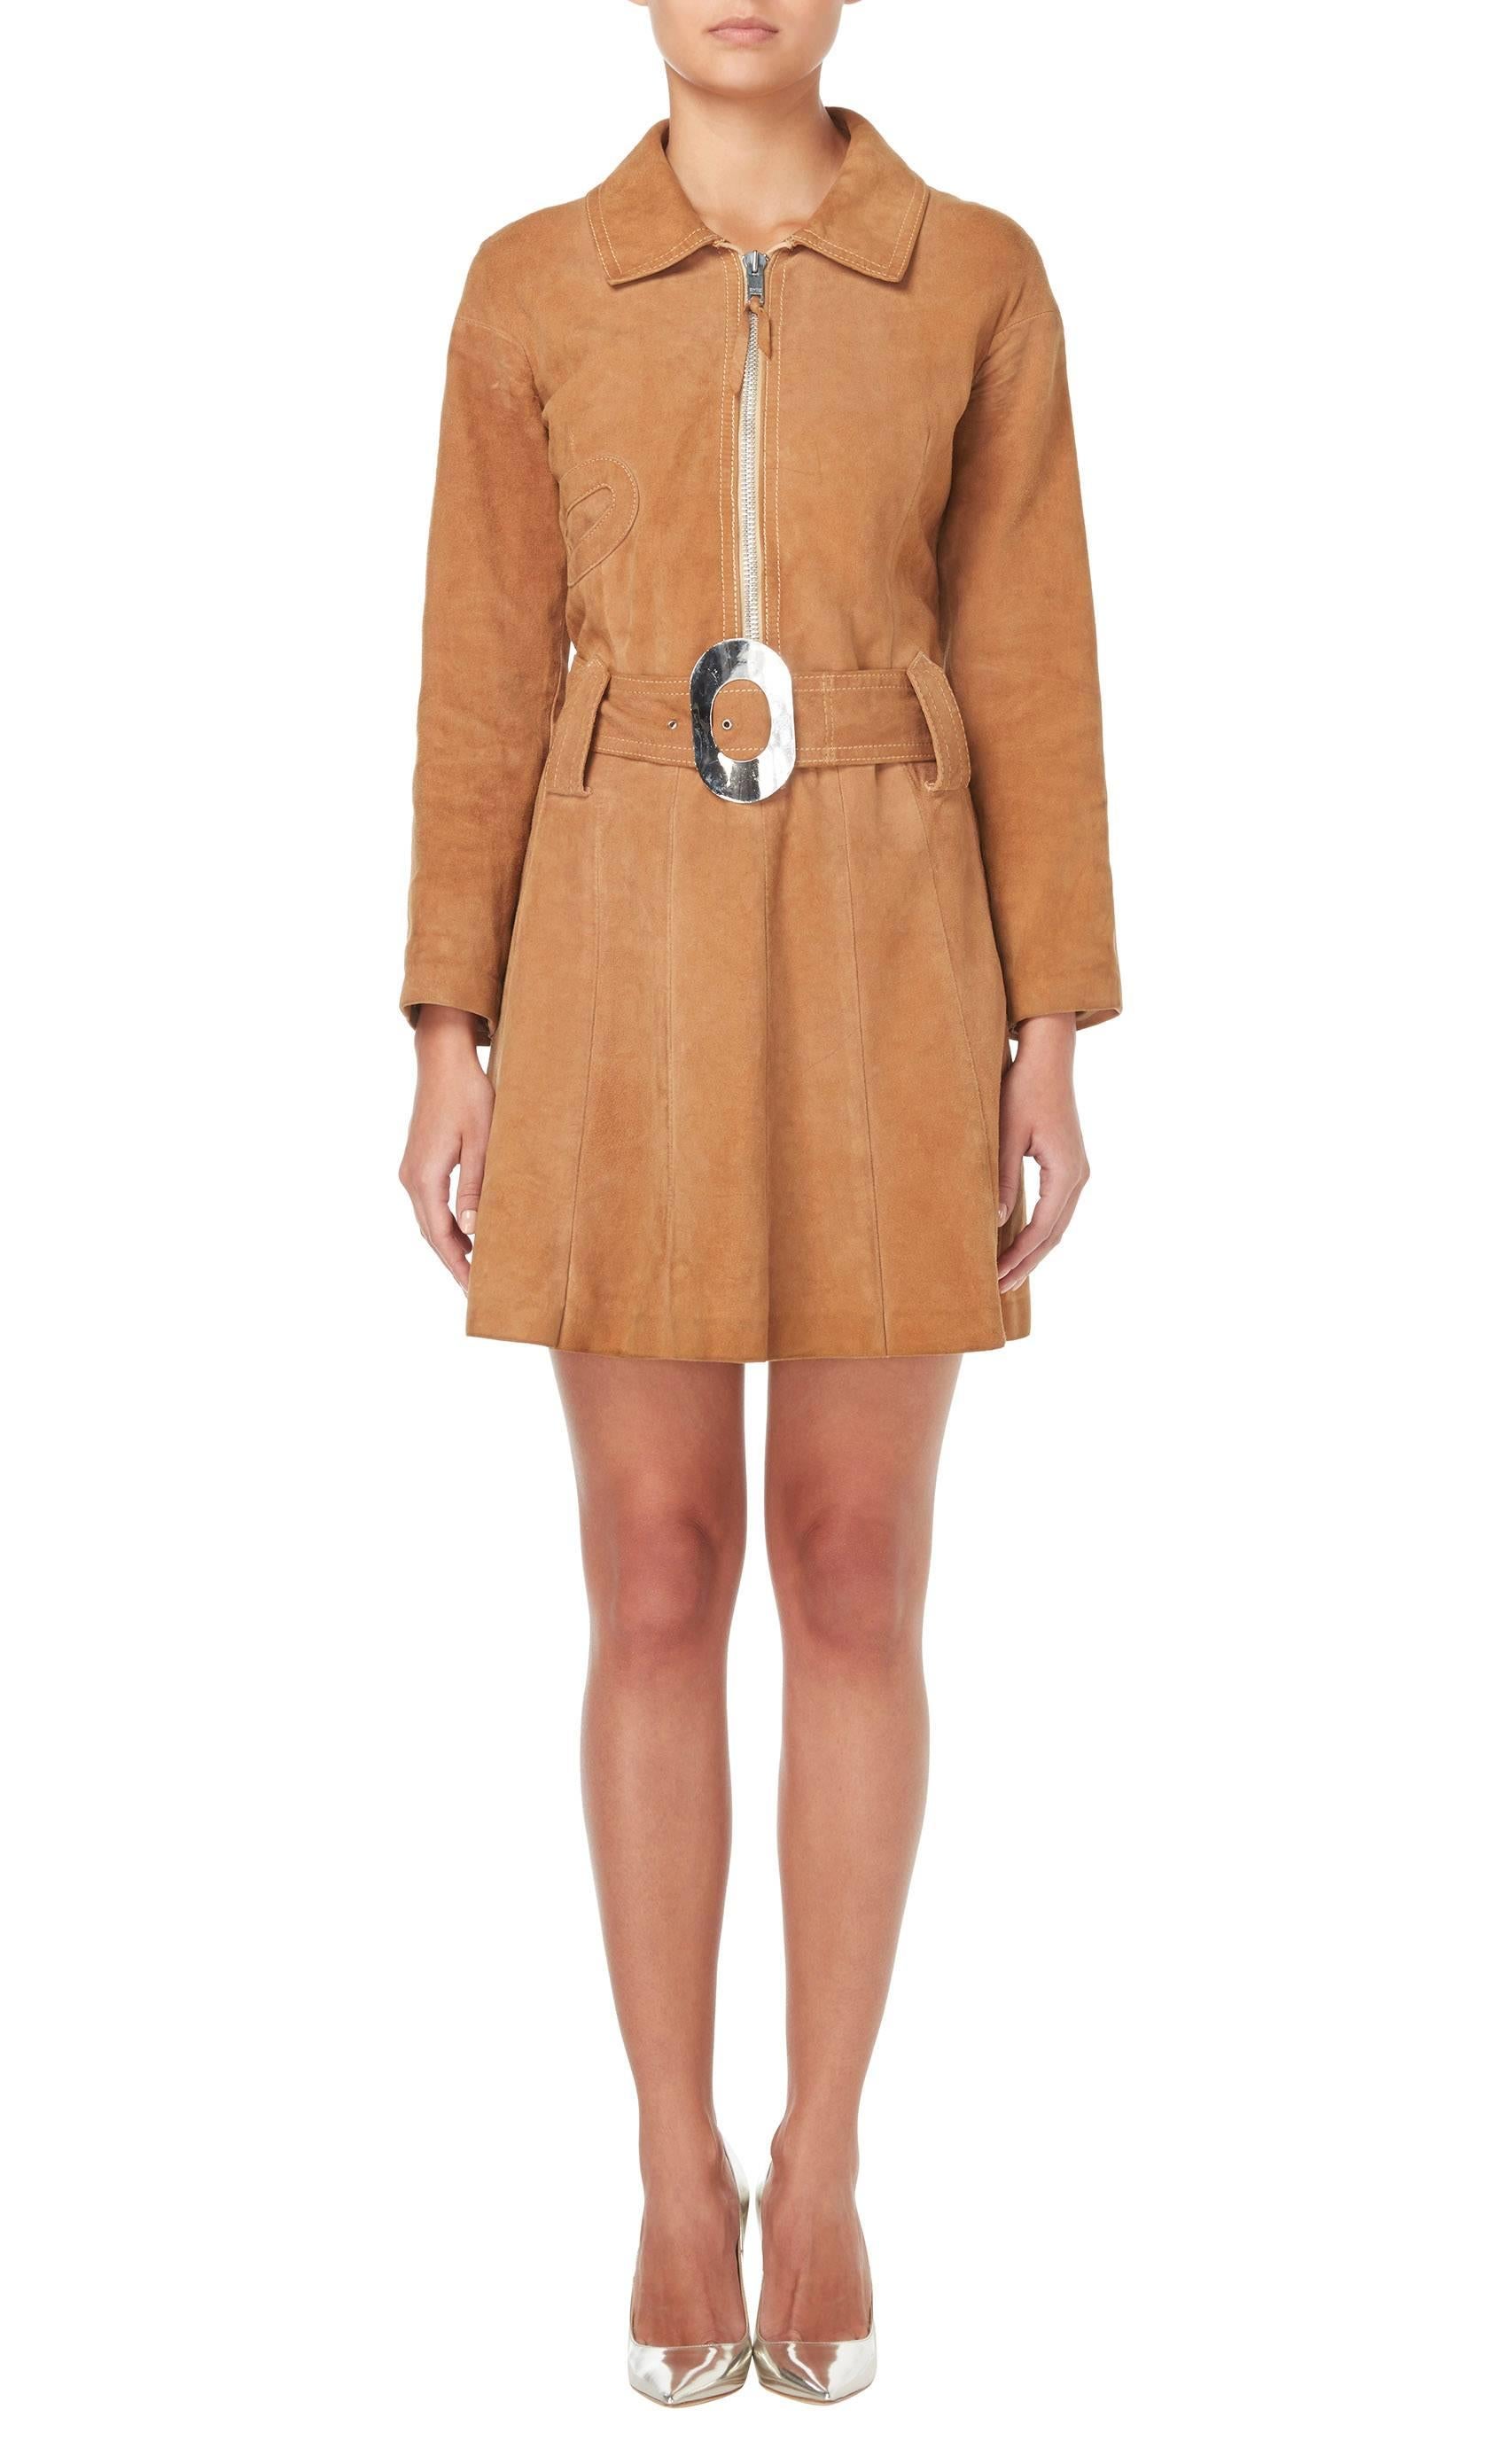 This Pierre Cardin brown suede dress is a fun piece that will fit perfectly within a contemporary wardrobe. Constructed in soft tan suede, the dress features a collar and long sleeves, which balance out the shorter length of the skirt. A chunky zip